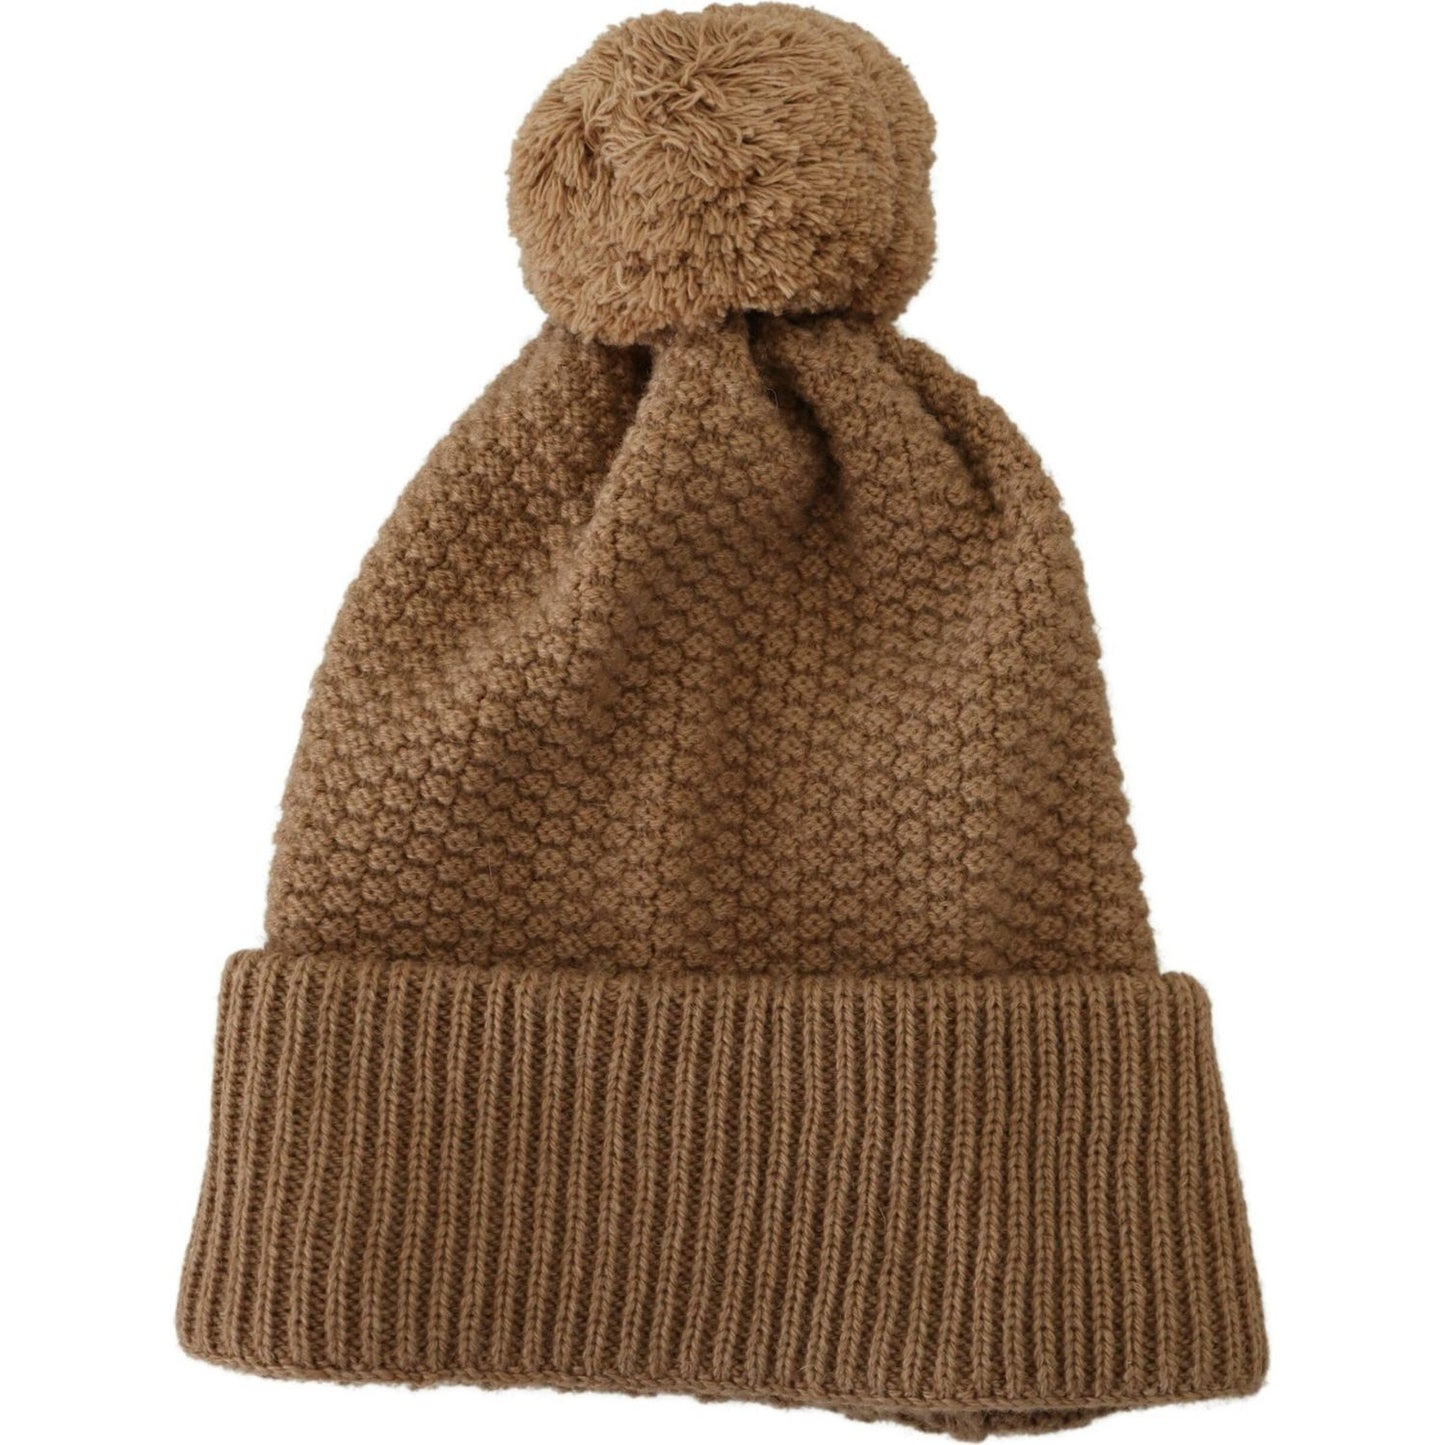 Dolce & Gabbana Elegant Camel Knit Beanie with Fur Accent brown-solid-knitted-fur-ball-winter-beanie-hat